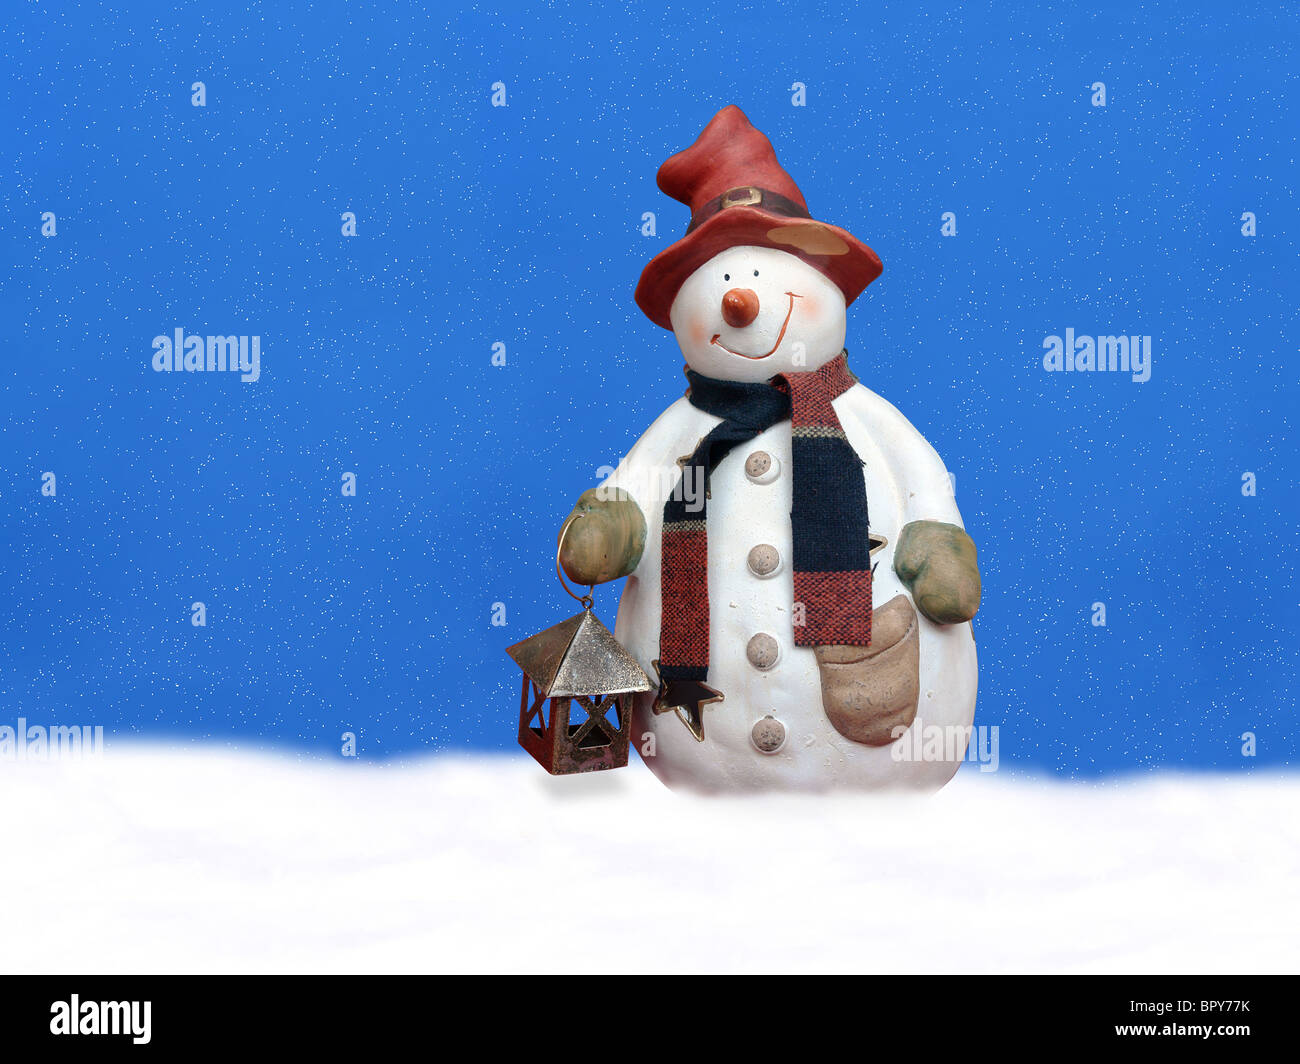 Snowman with red hat holding small lantern, reflecting in blue ice floe Stock Photo